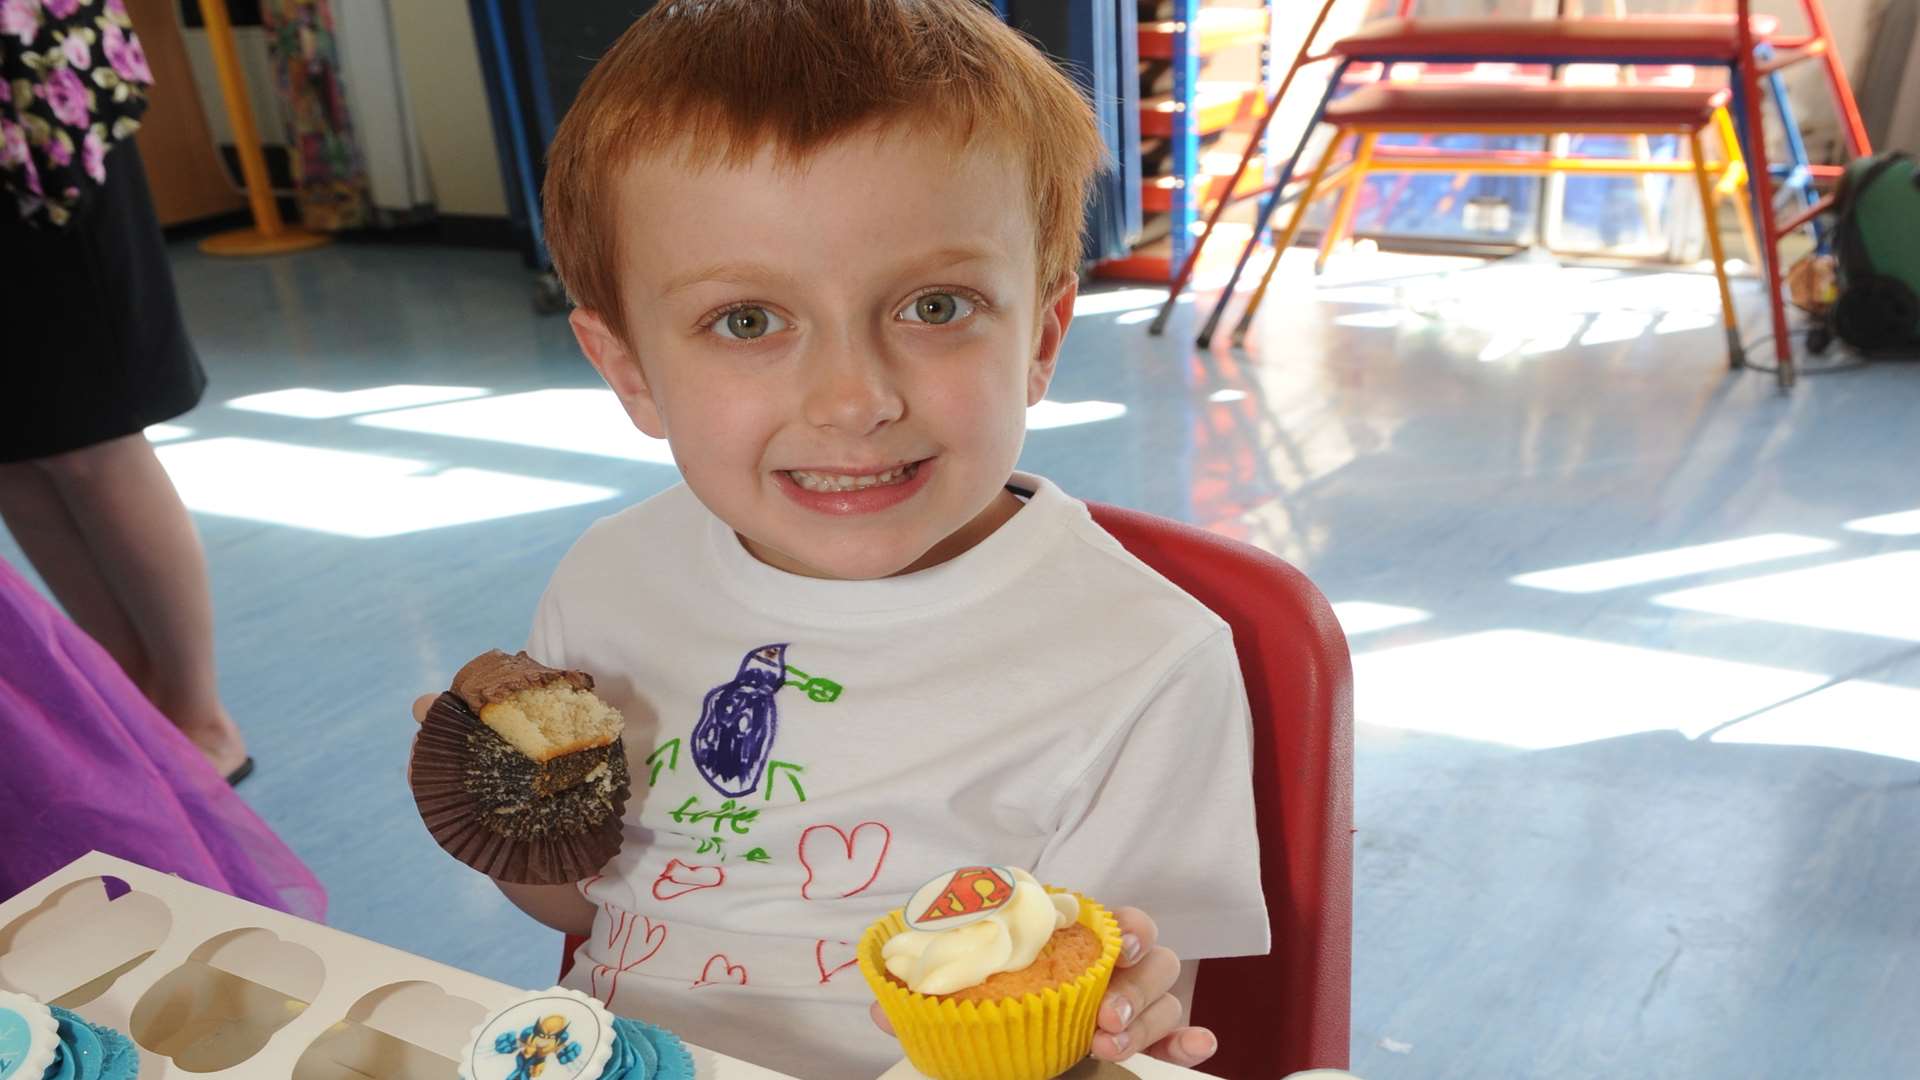 Tommy held a bake sale at his school for Red Lippy Day